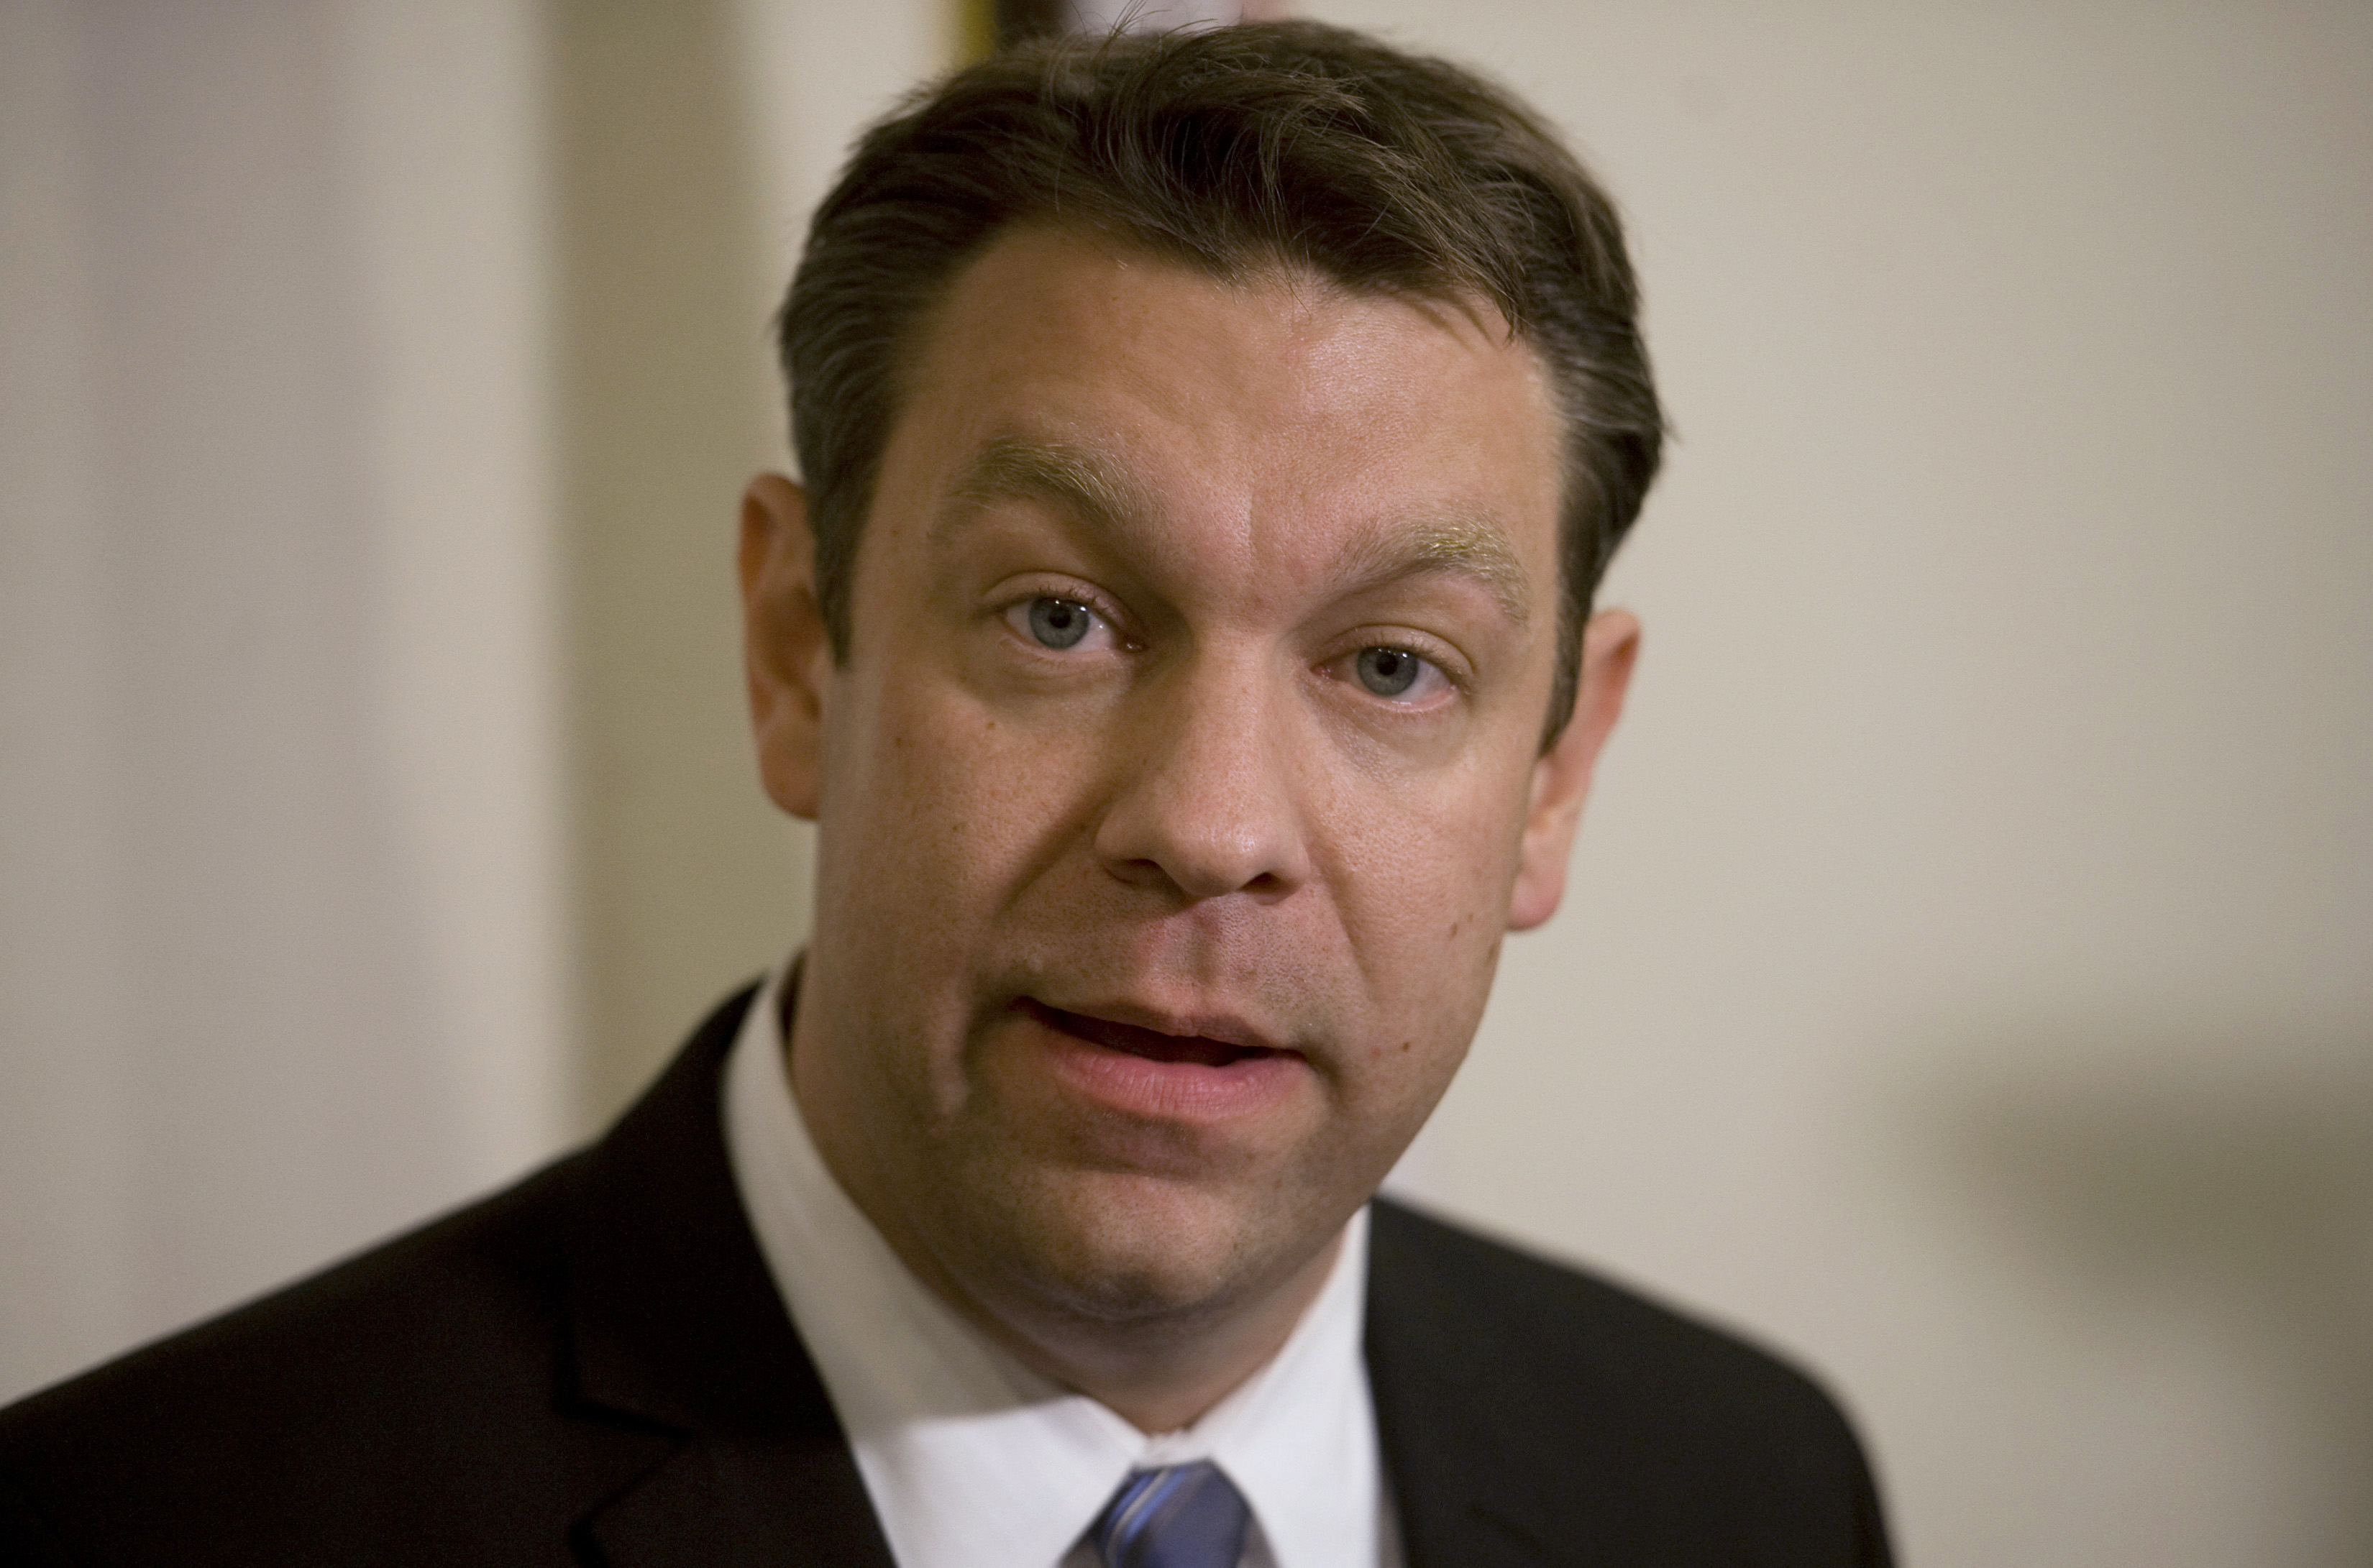 Report: Florida Congressman Radel to Resign After Cocaine Charge